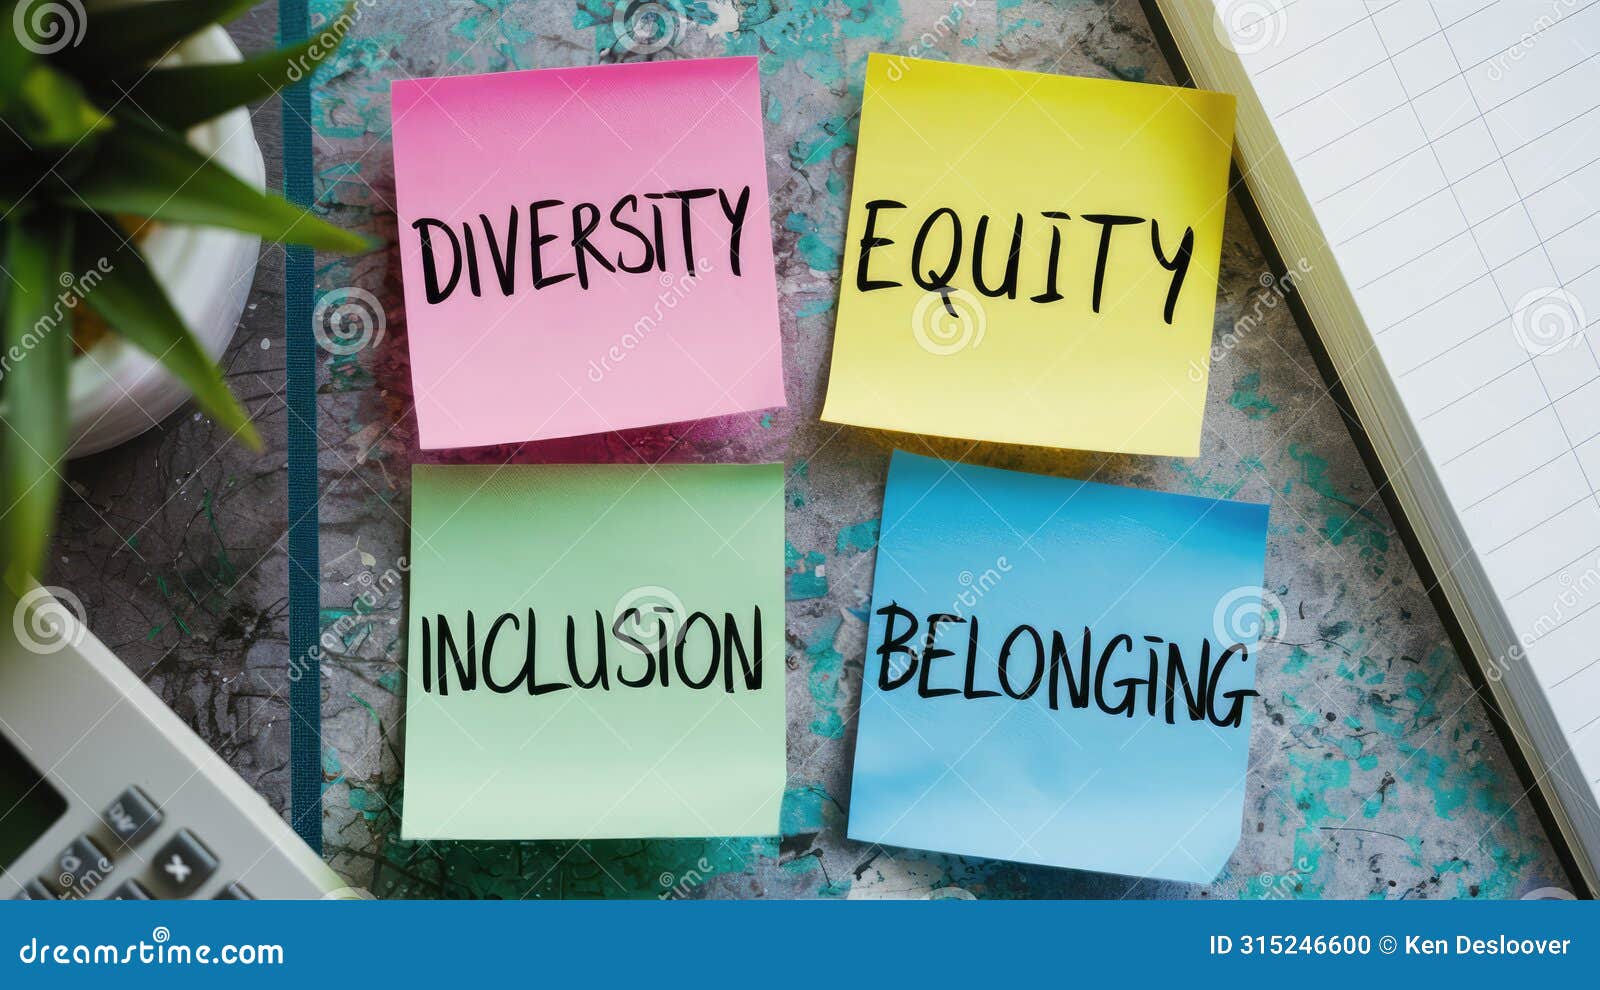 three sticky notes core values of diversity equity inclusion belonging